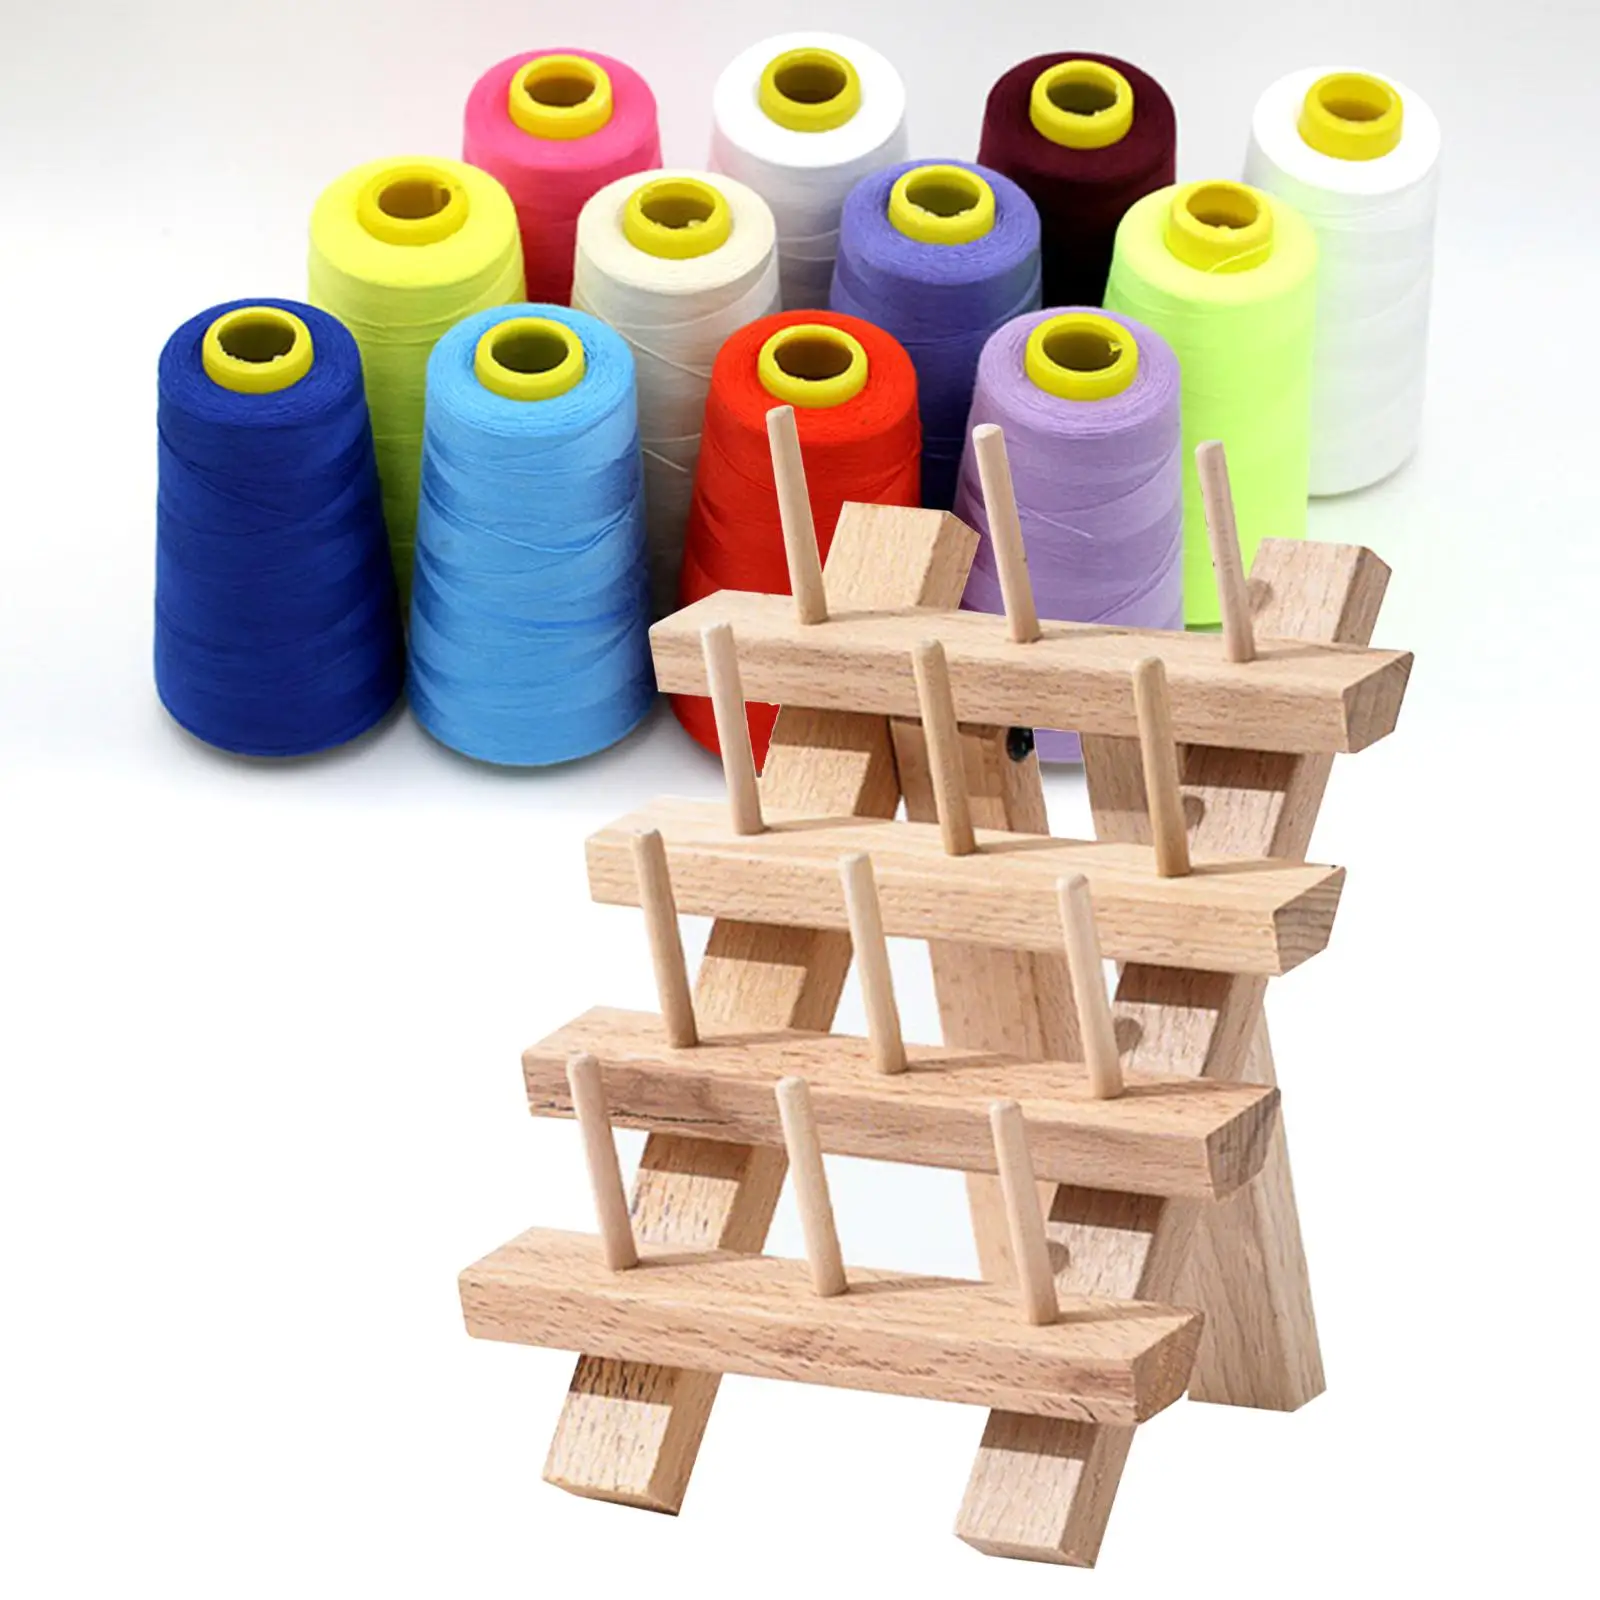 Sewing Thread Rack Holder Wood Spool Holder for Embroidery Braid Knitting